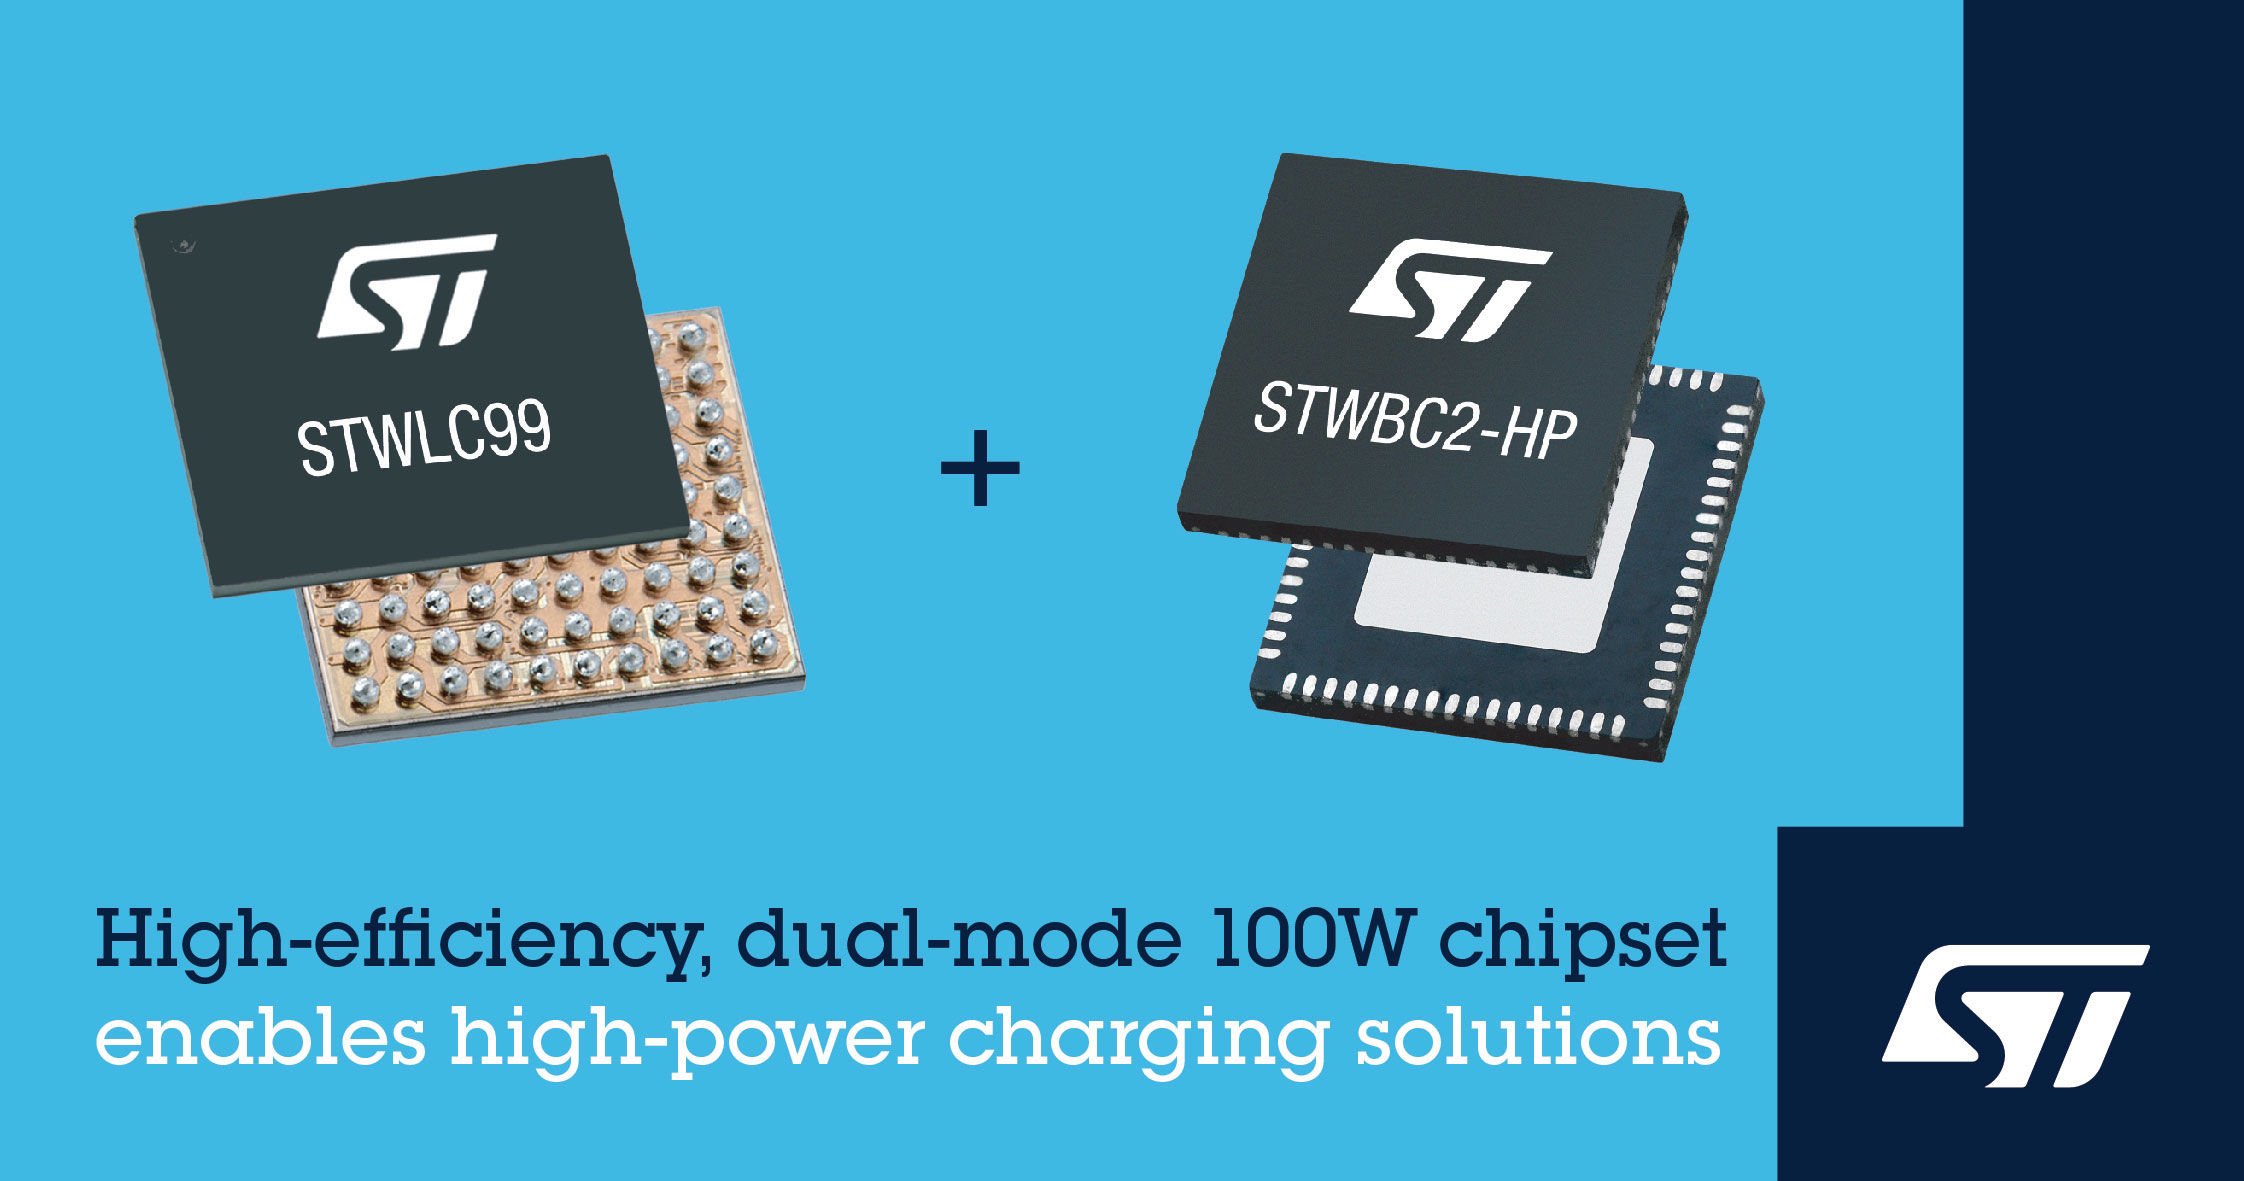 STMicroelectronics Reveals 100-Watt Wireless Power Receiver for Fastest Qi-Compliant Charging